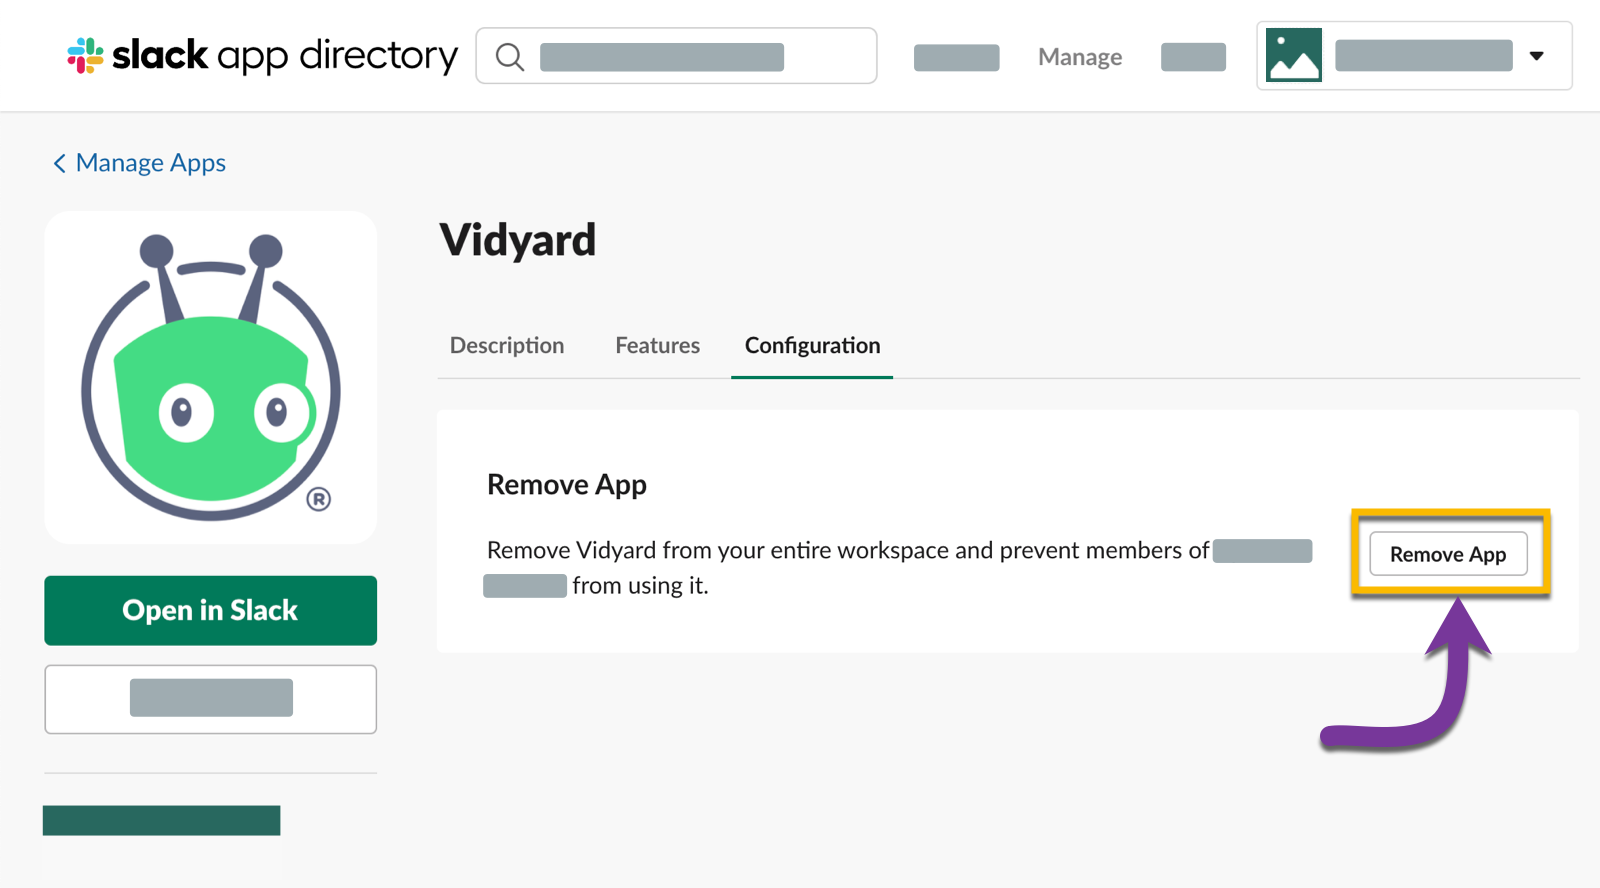 Removing Vidyard from your workspace in the Slack App Directory